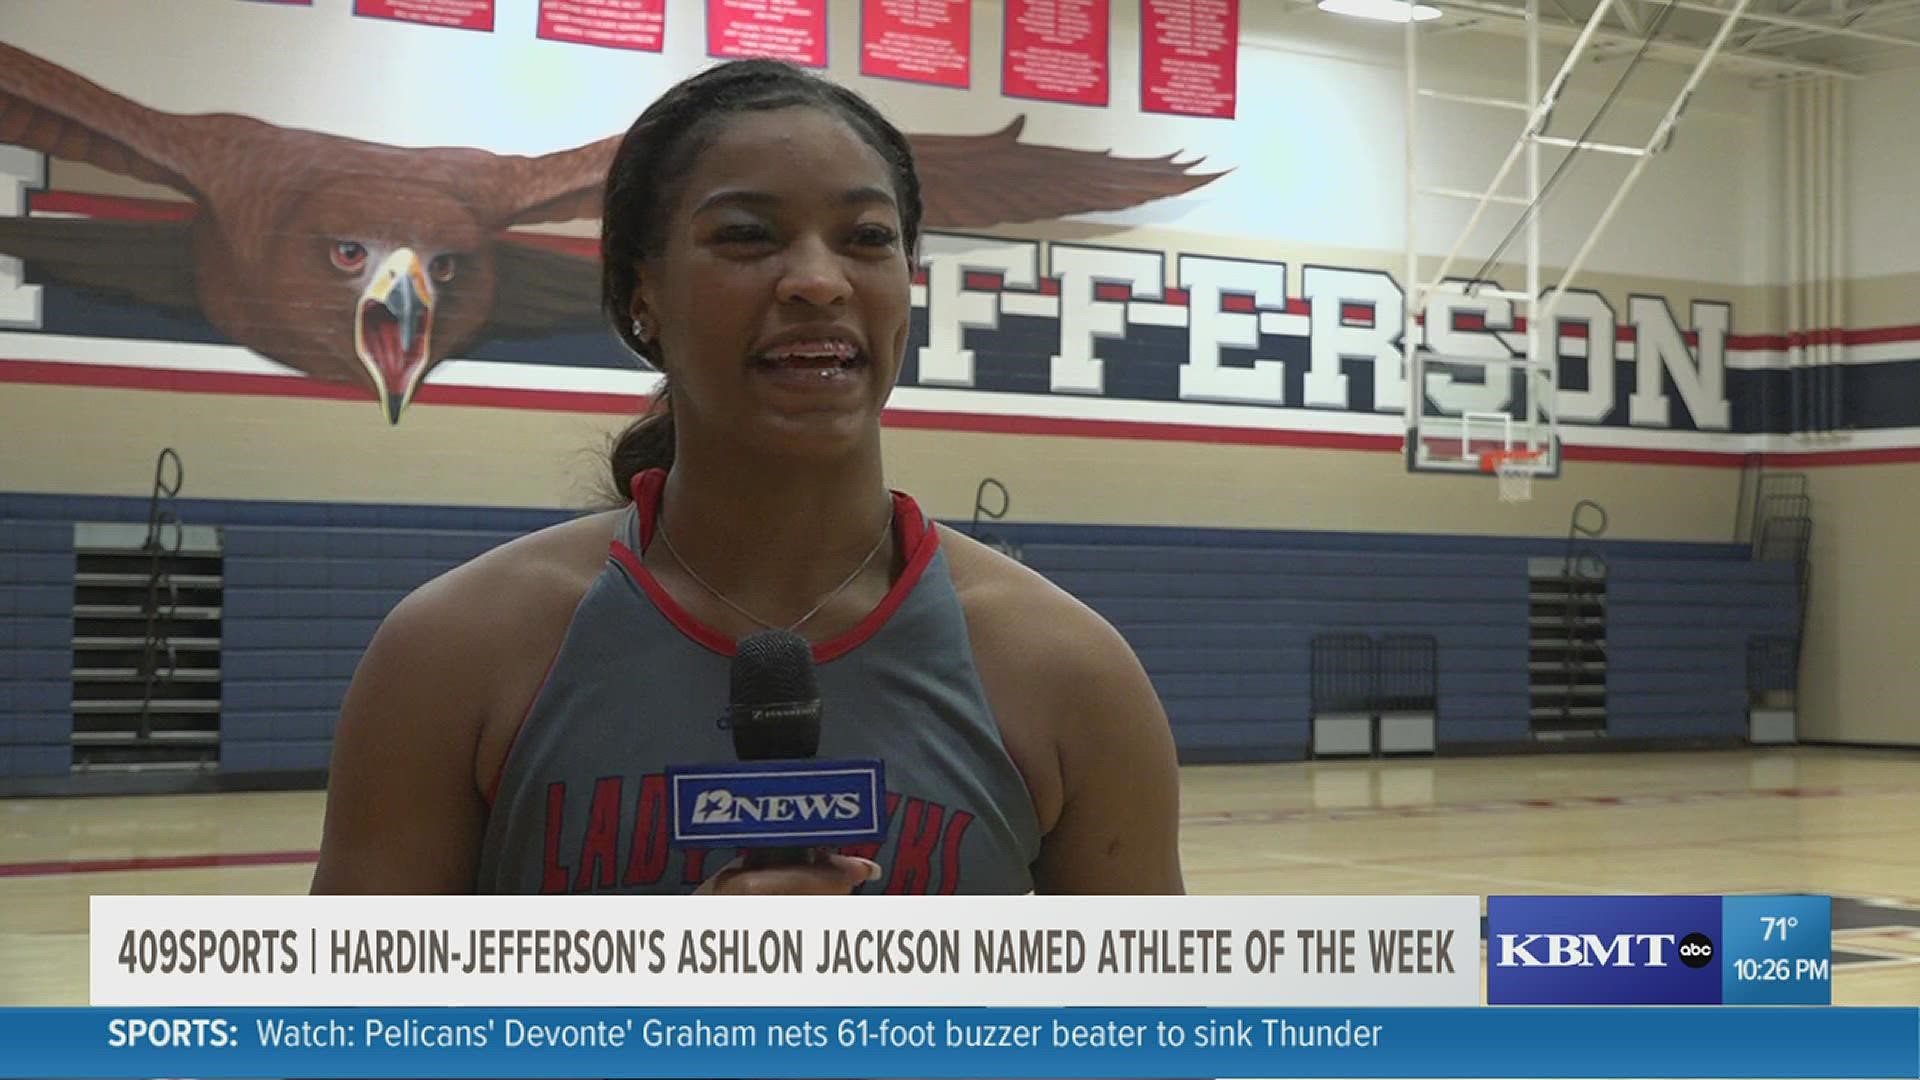 Future Duke Woman's basketball player earns Athlete of the Week honors.